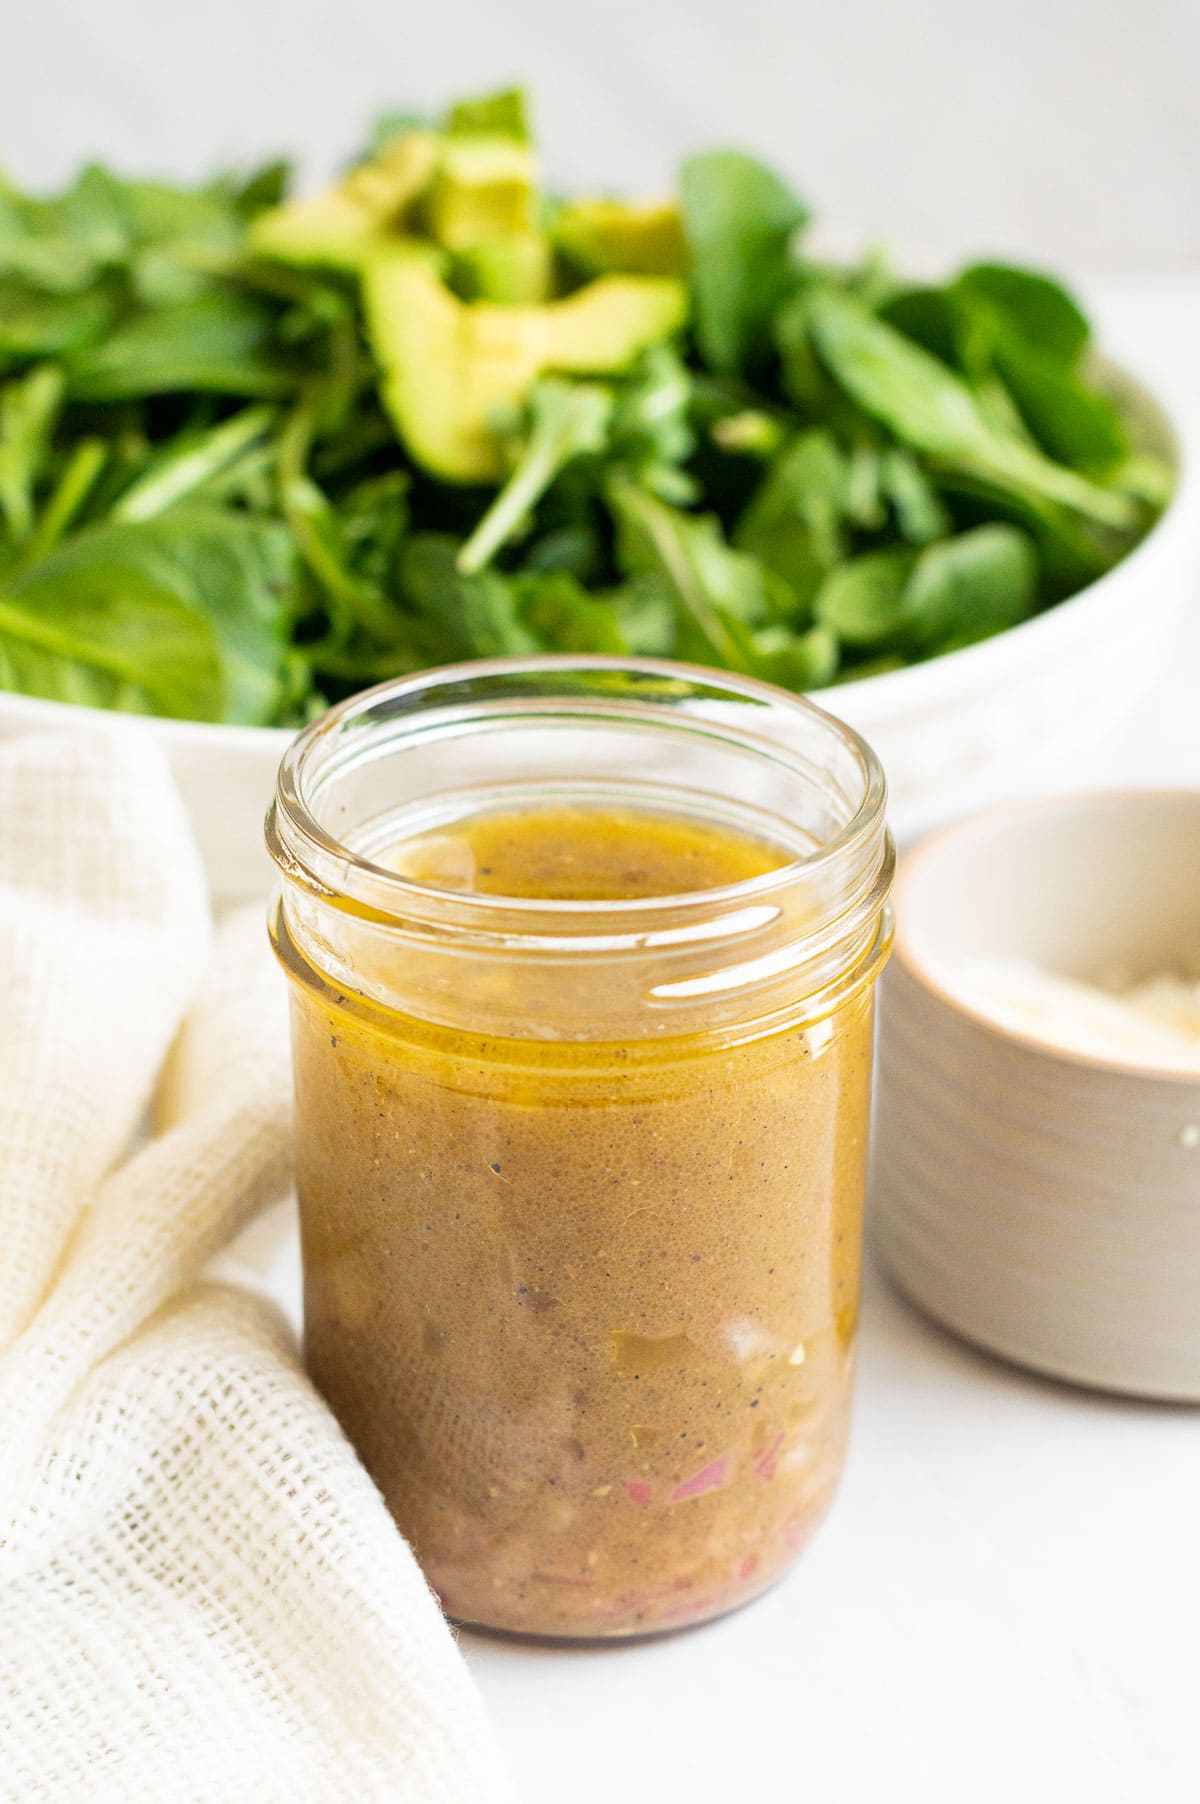 Spinach salad dressing in a jar with salad in a bowl behind it.